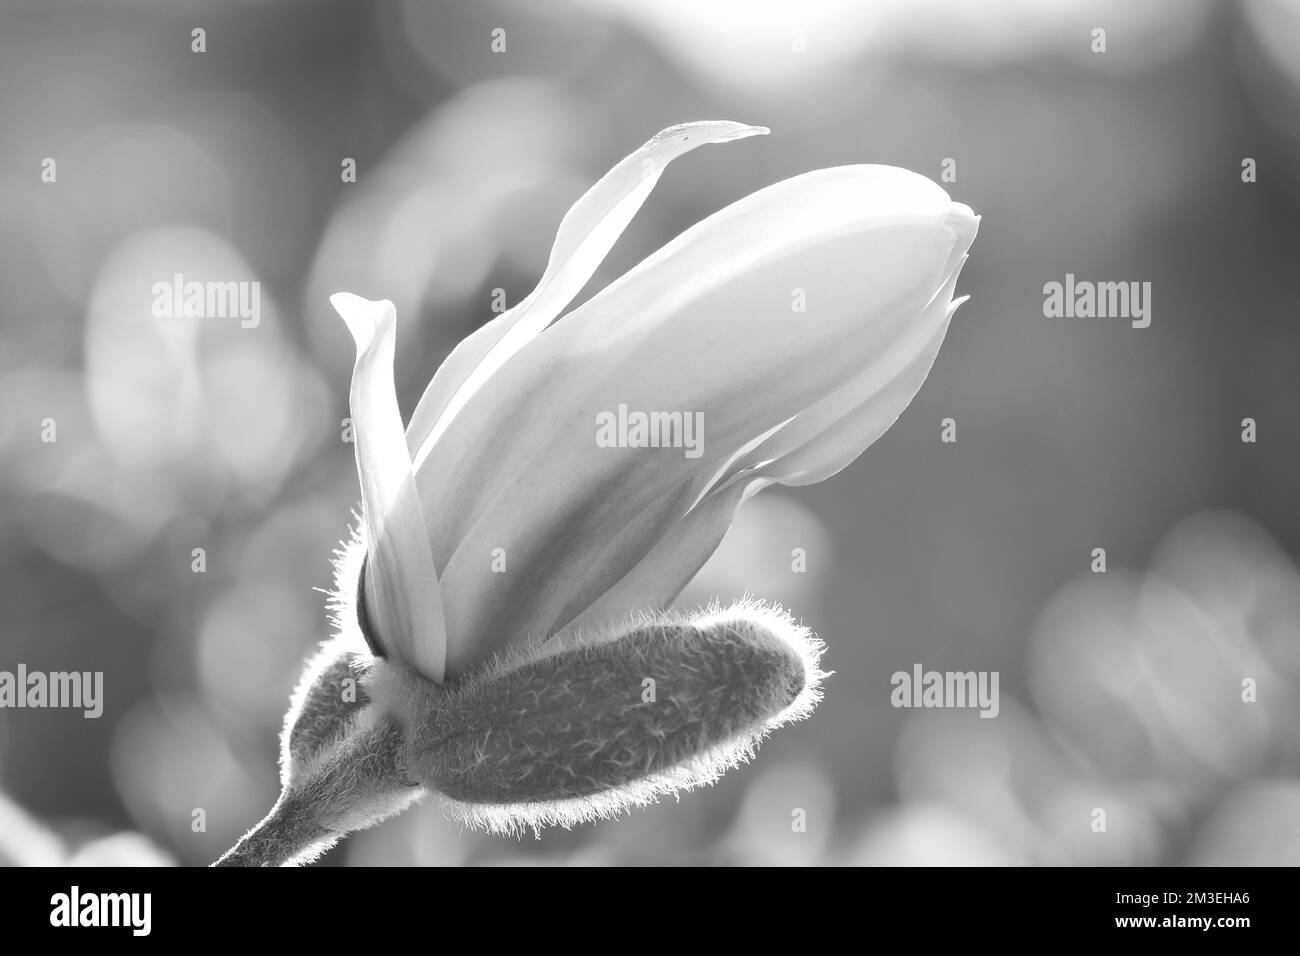 Magnolia blossom on a magnolia tree taken in black and white. Magnolia trees are a true splendor in the flowering season. An eye catcher in the landsc Stock Photo